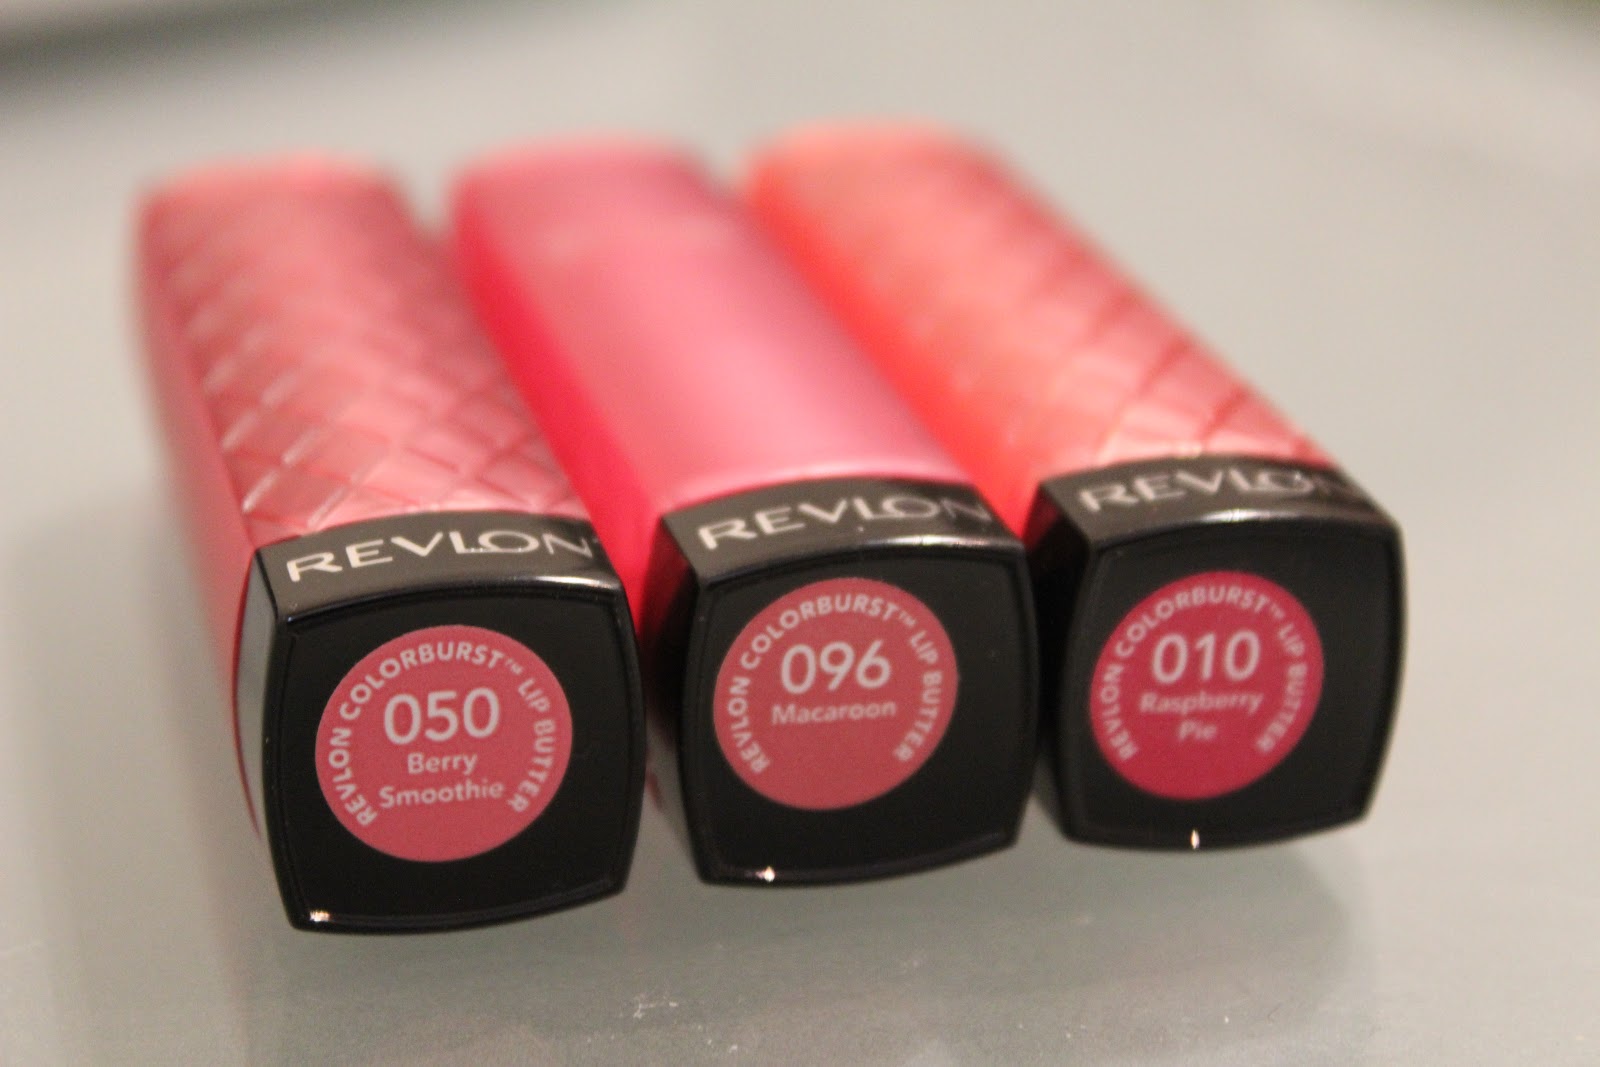 Revlon Lip Butter in Creamsicle - Review | The Sunday Girl